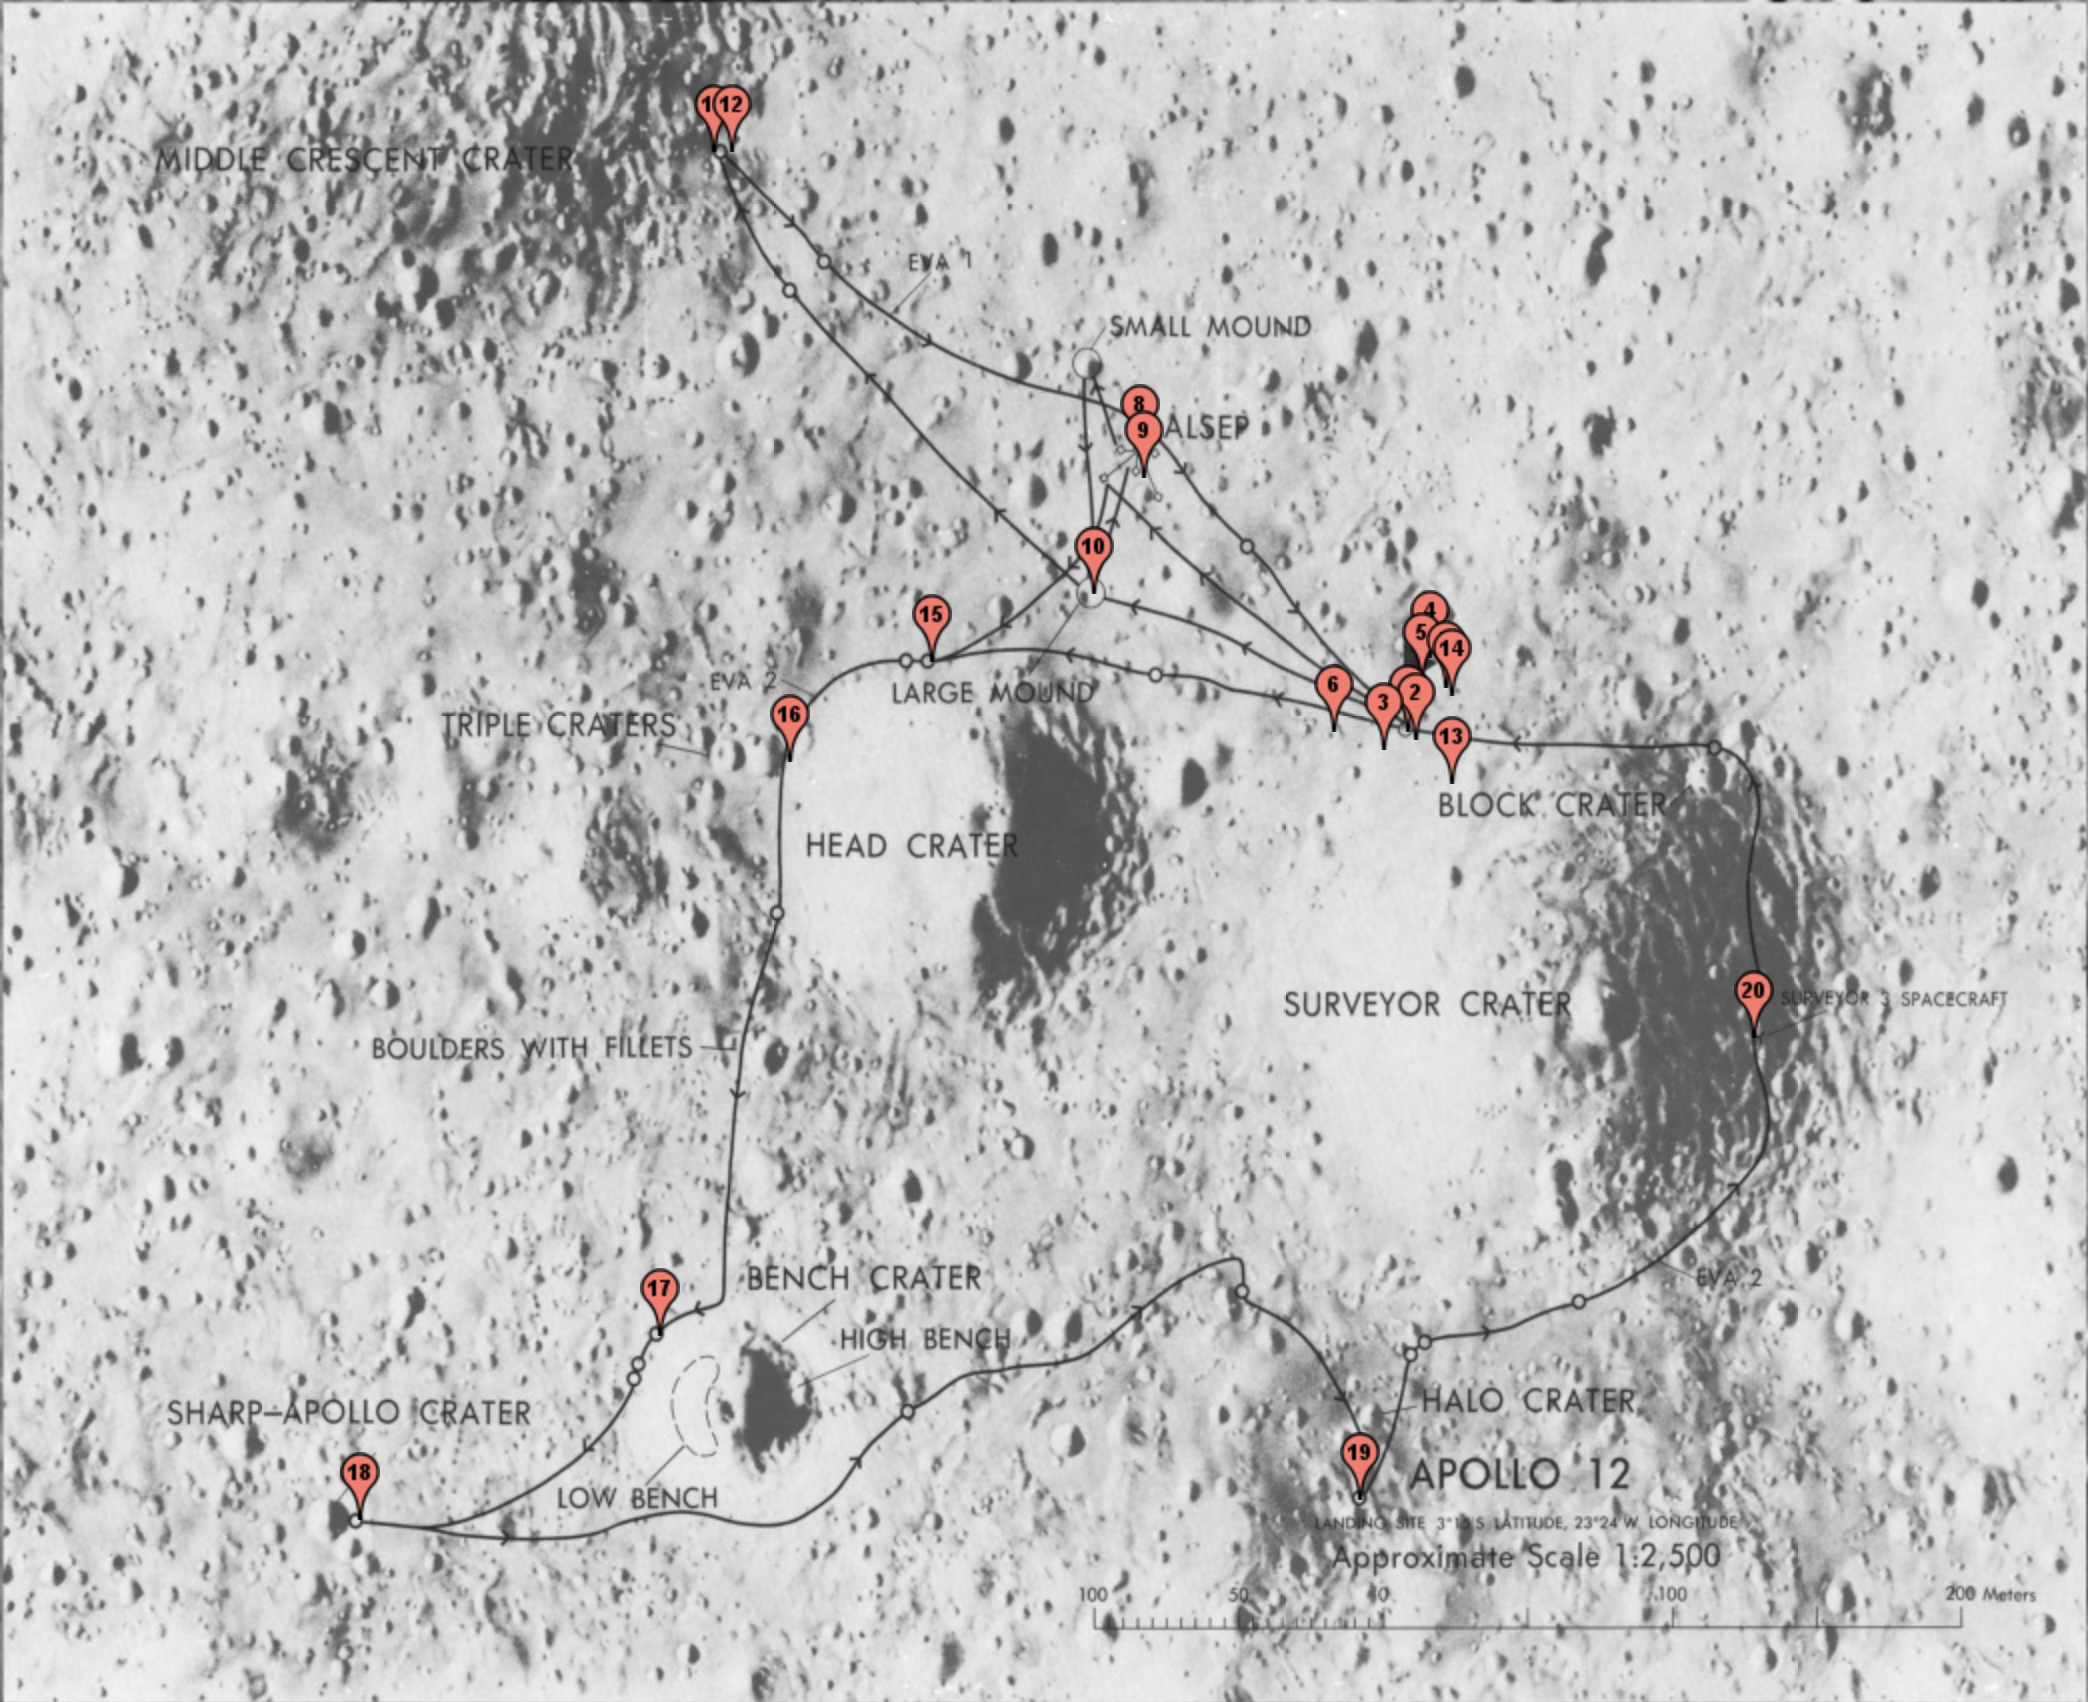 _images/apollo12-map.png